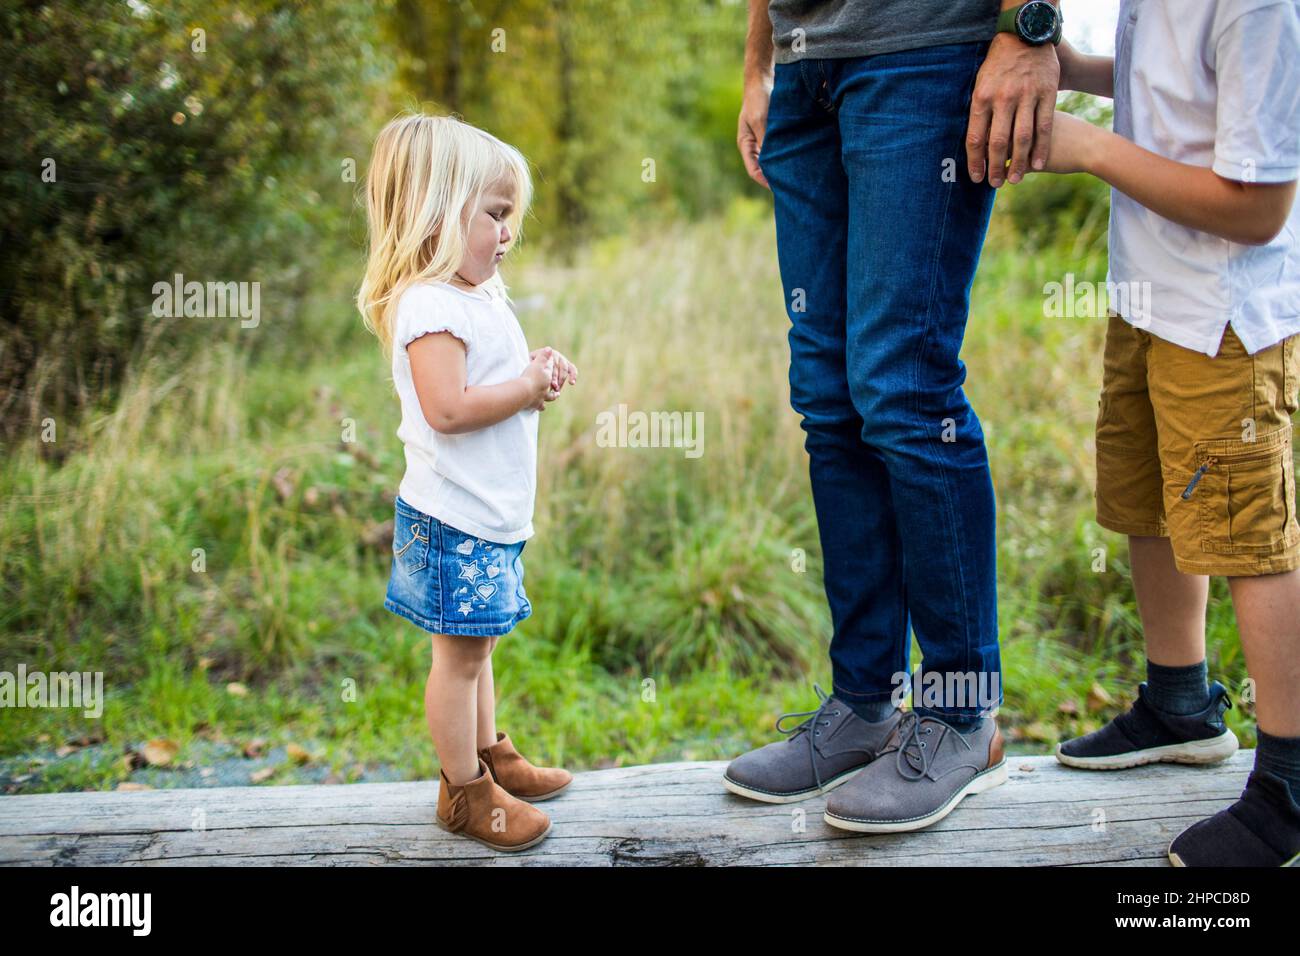 Young toddler girl, upset looking at tall daddy's legs Stock Photo